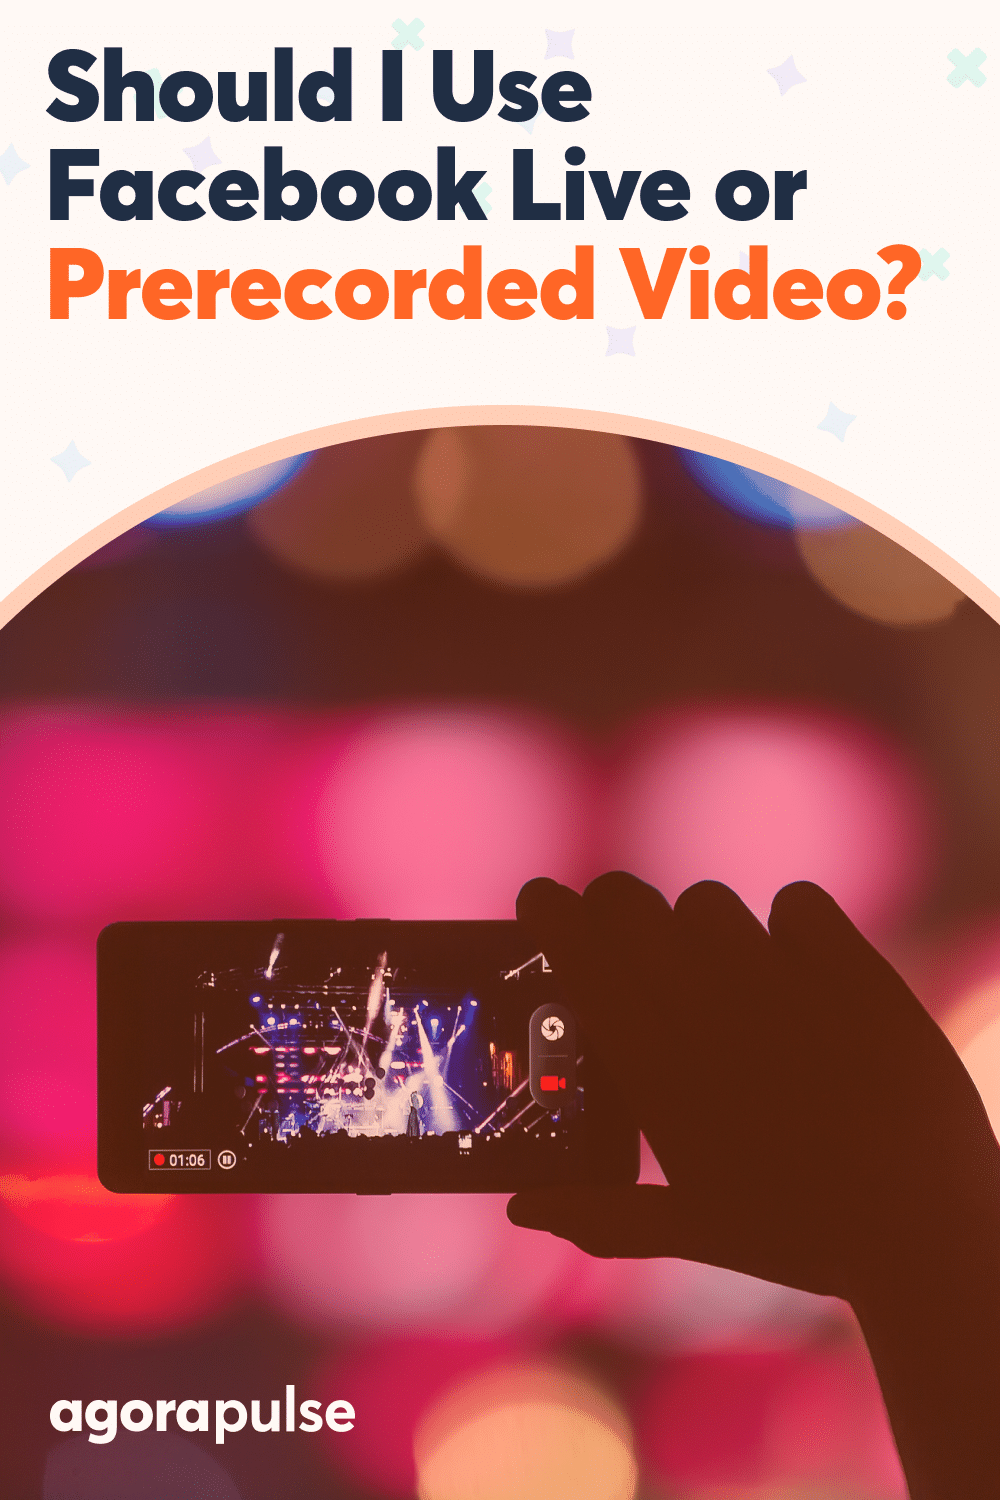 Should I Use Facebook Live or Prerecorded Video?